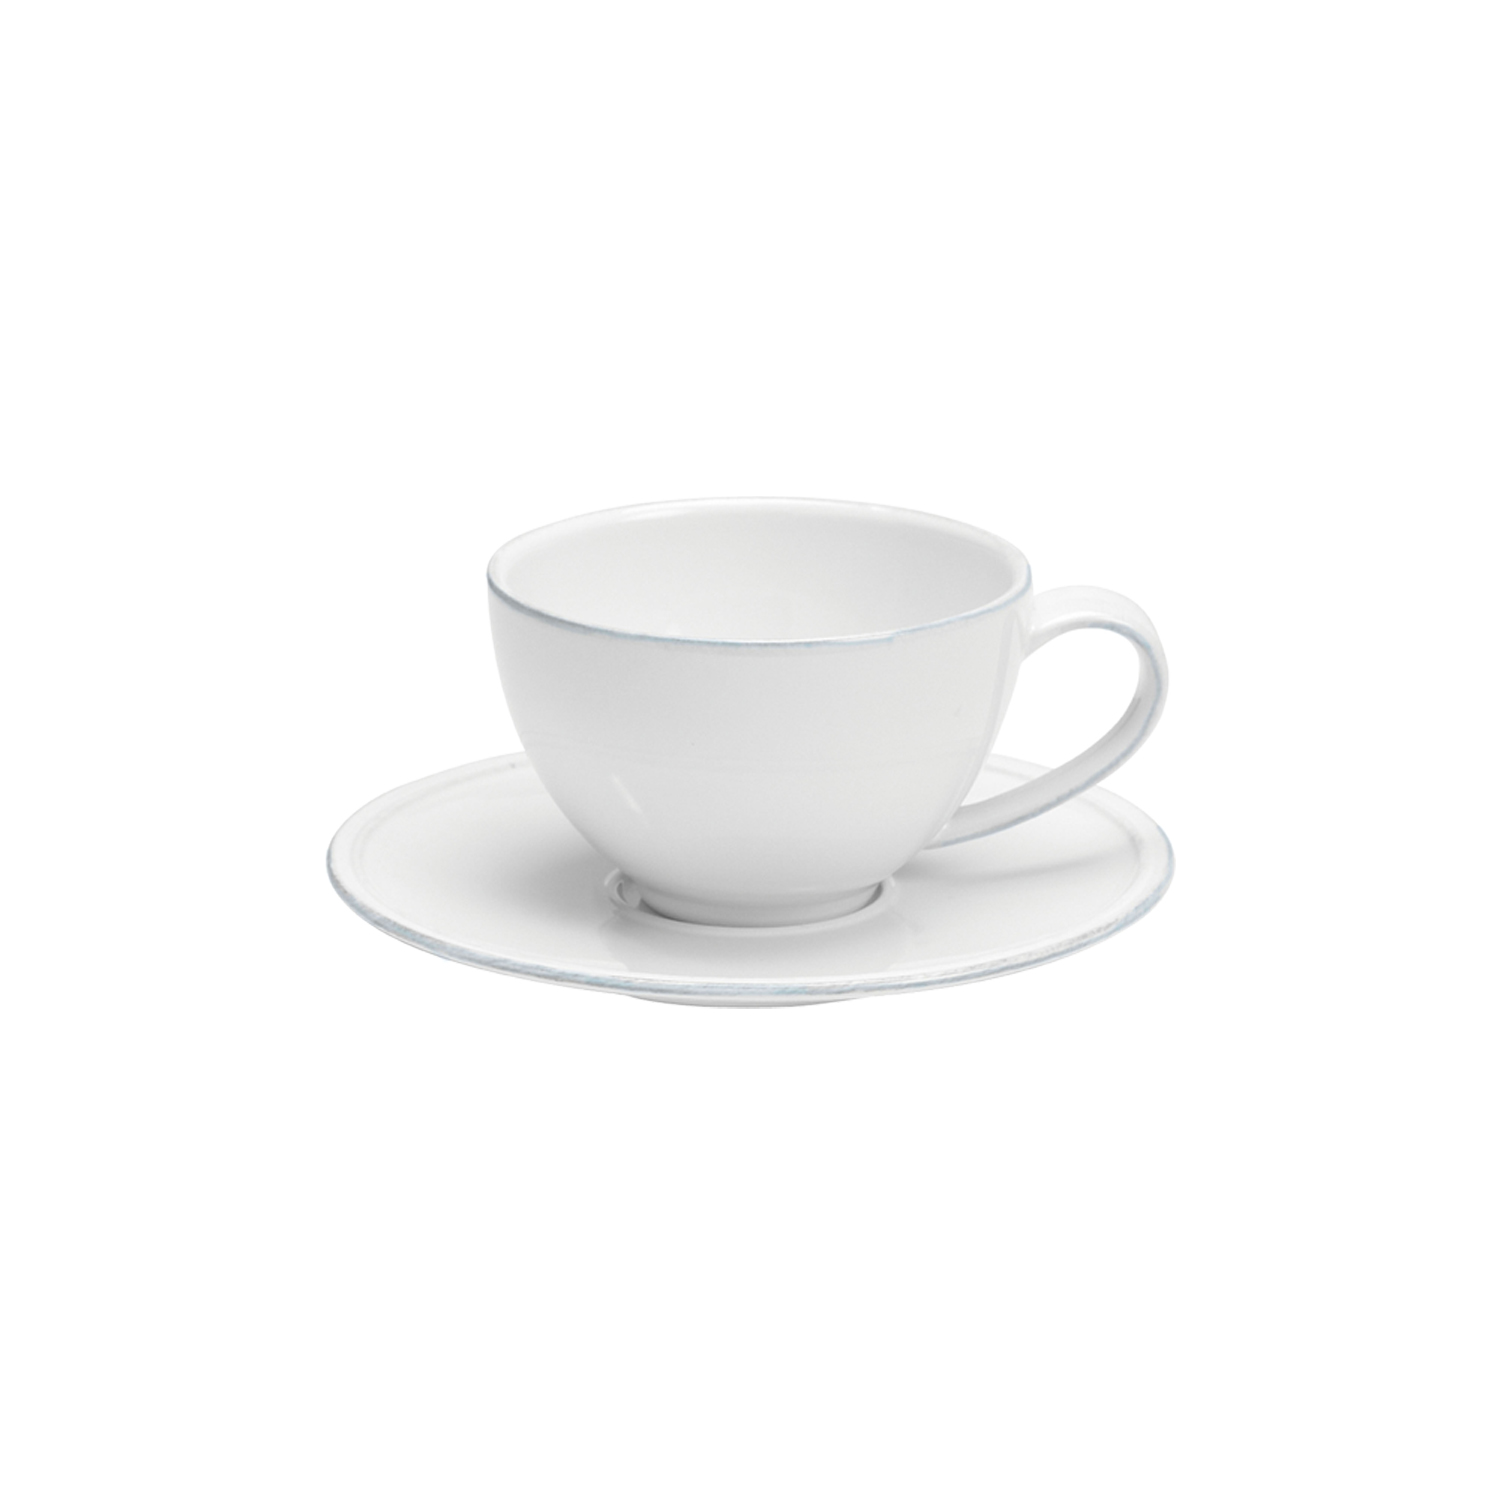 Friso White Tea Cup & Saucer 0.26l Gift